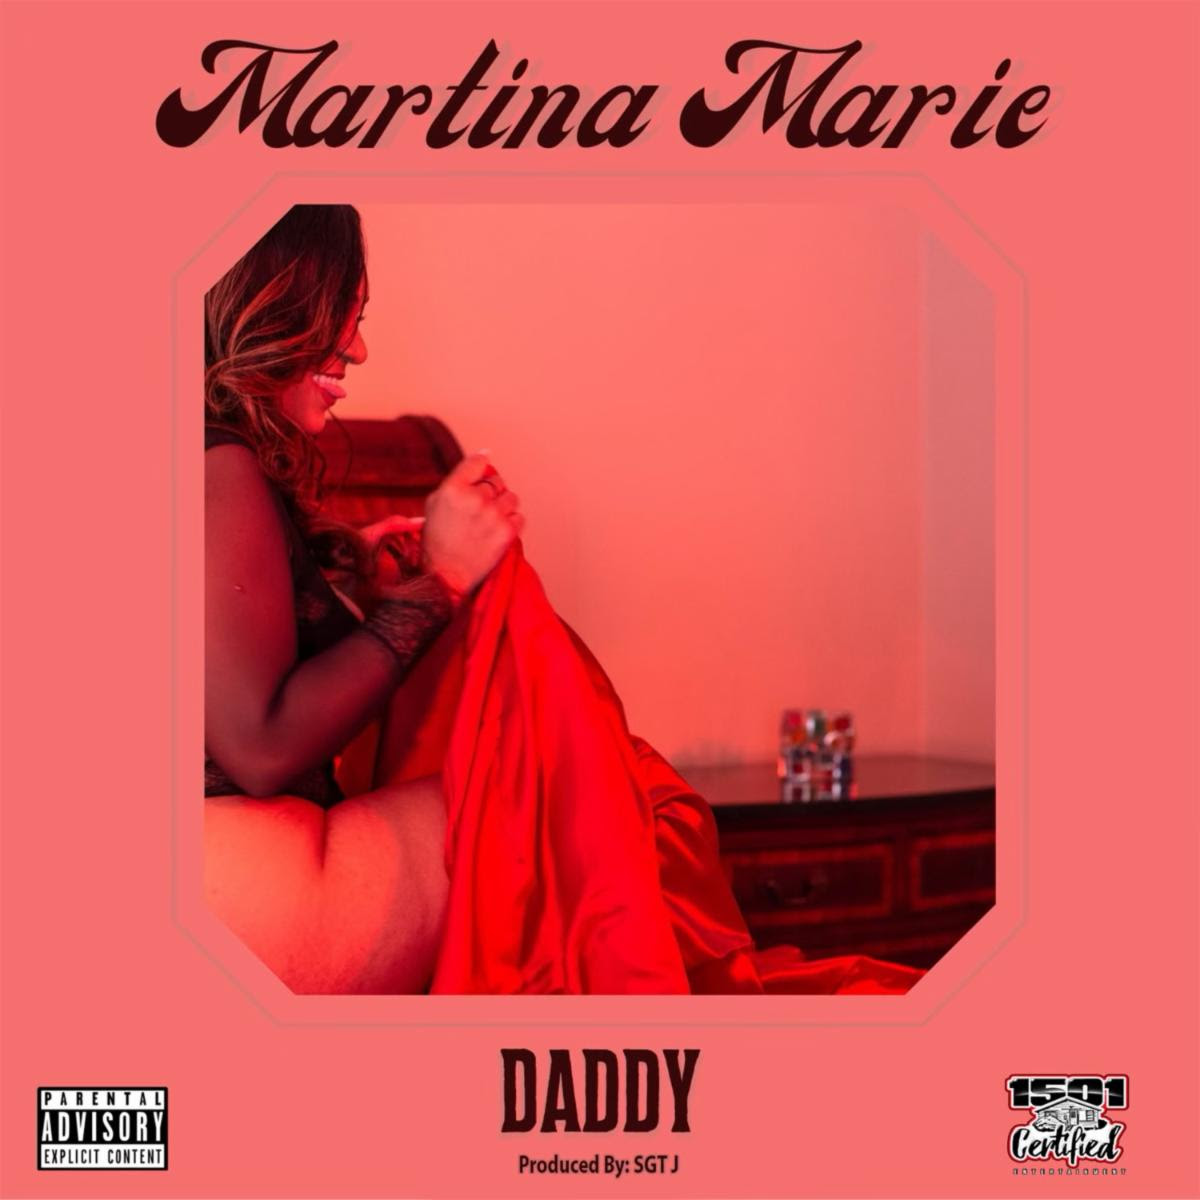 Art for Daddy by Martina Marie